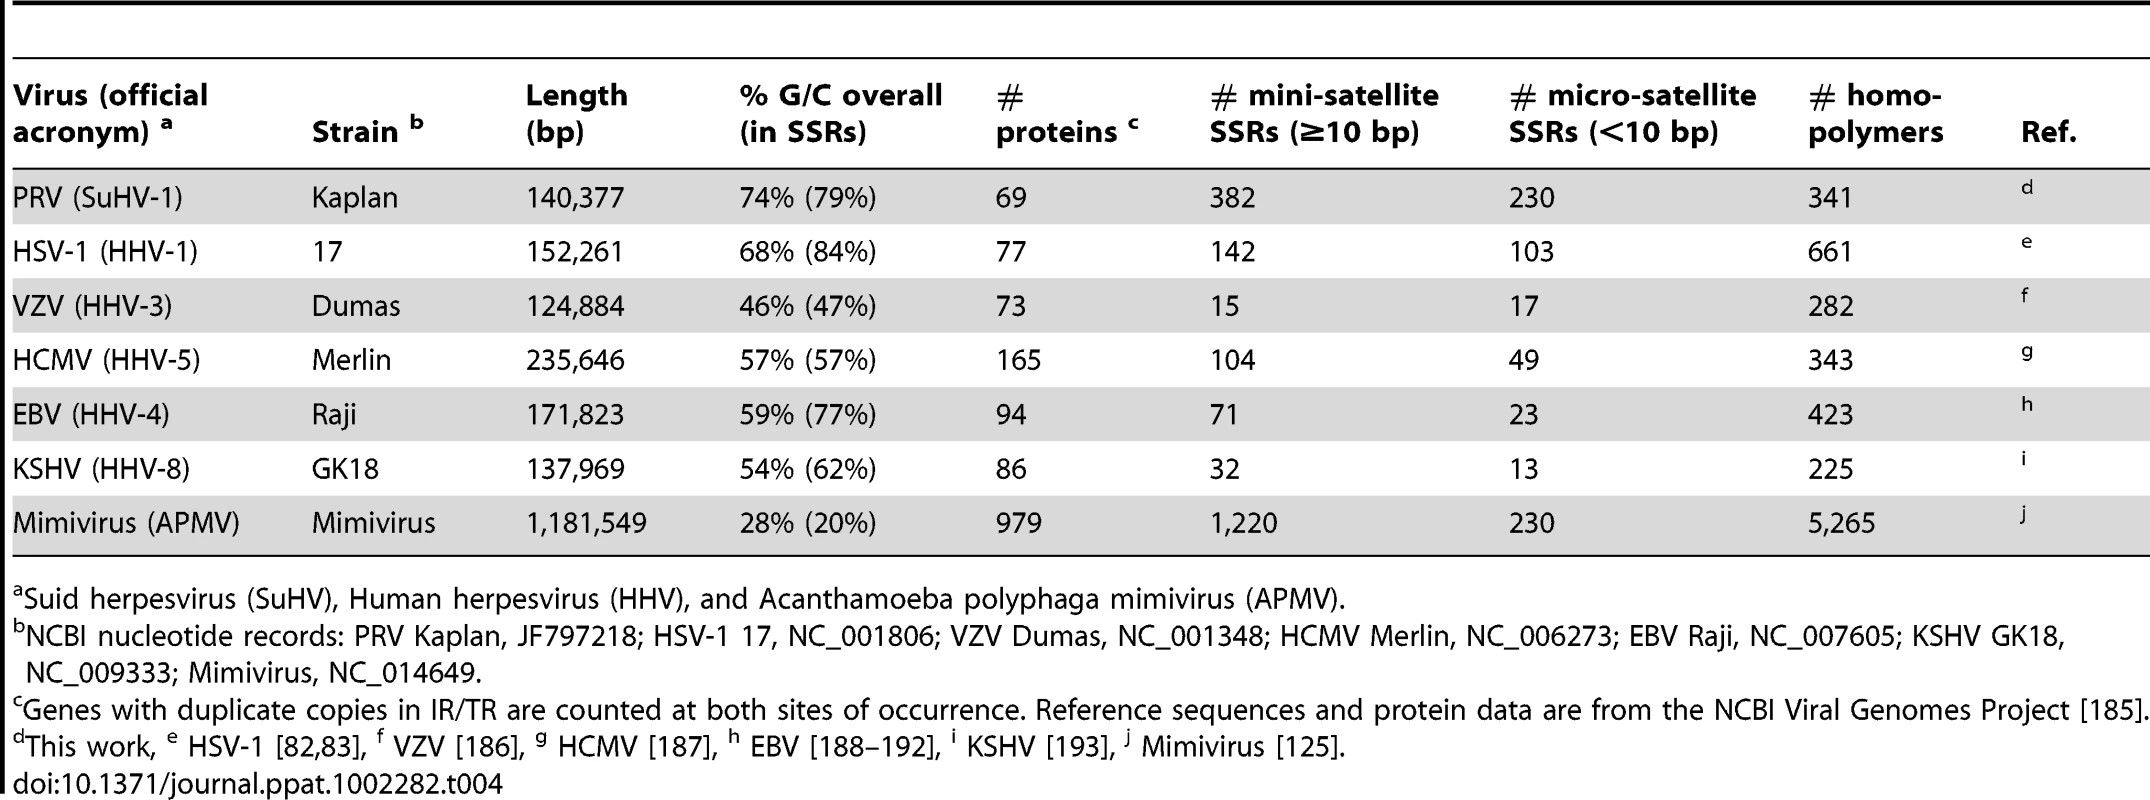 Comparison of ORF and SSR quantities in PRV, HSV-1, VZV, and Mimivirus.